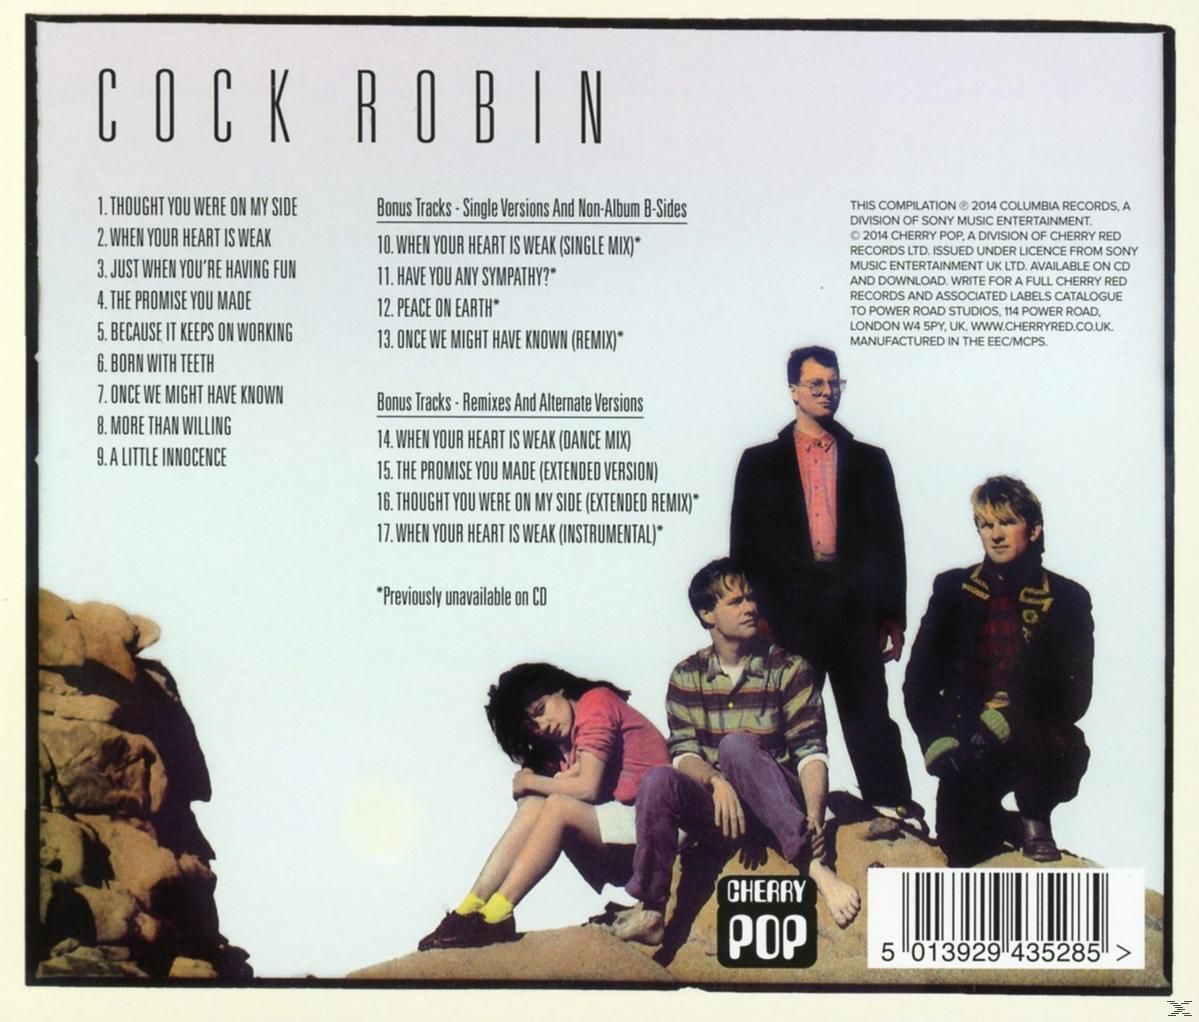 Edition) Robin - Robin Cock (CD) Cock - (Remastered+Expanded